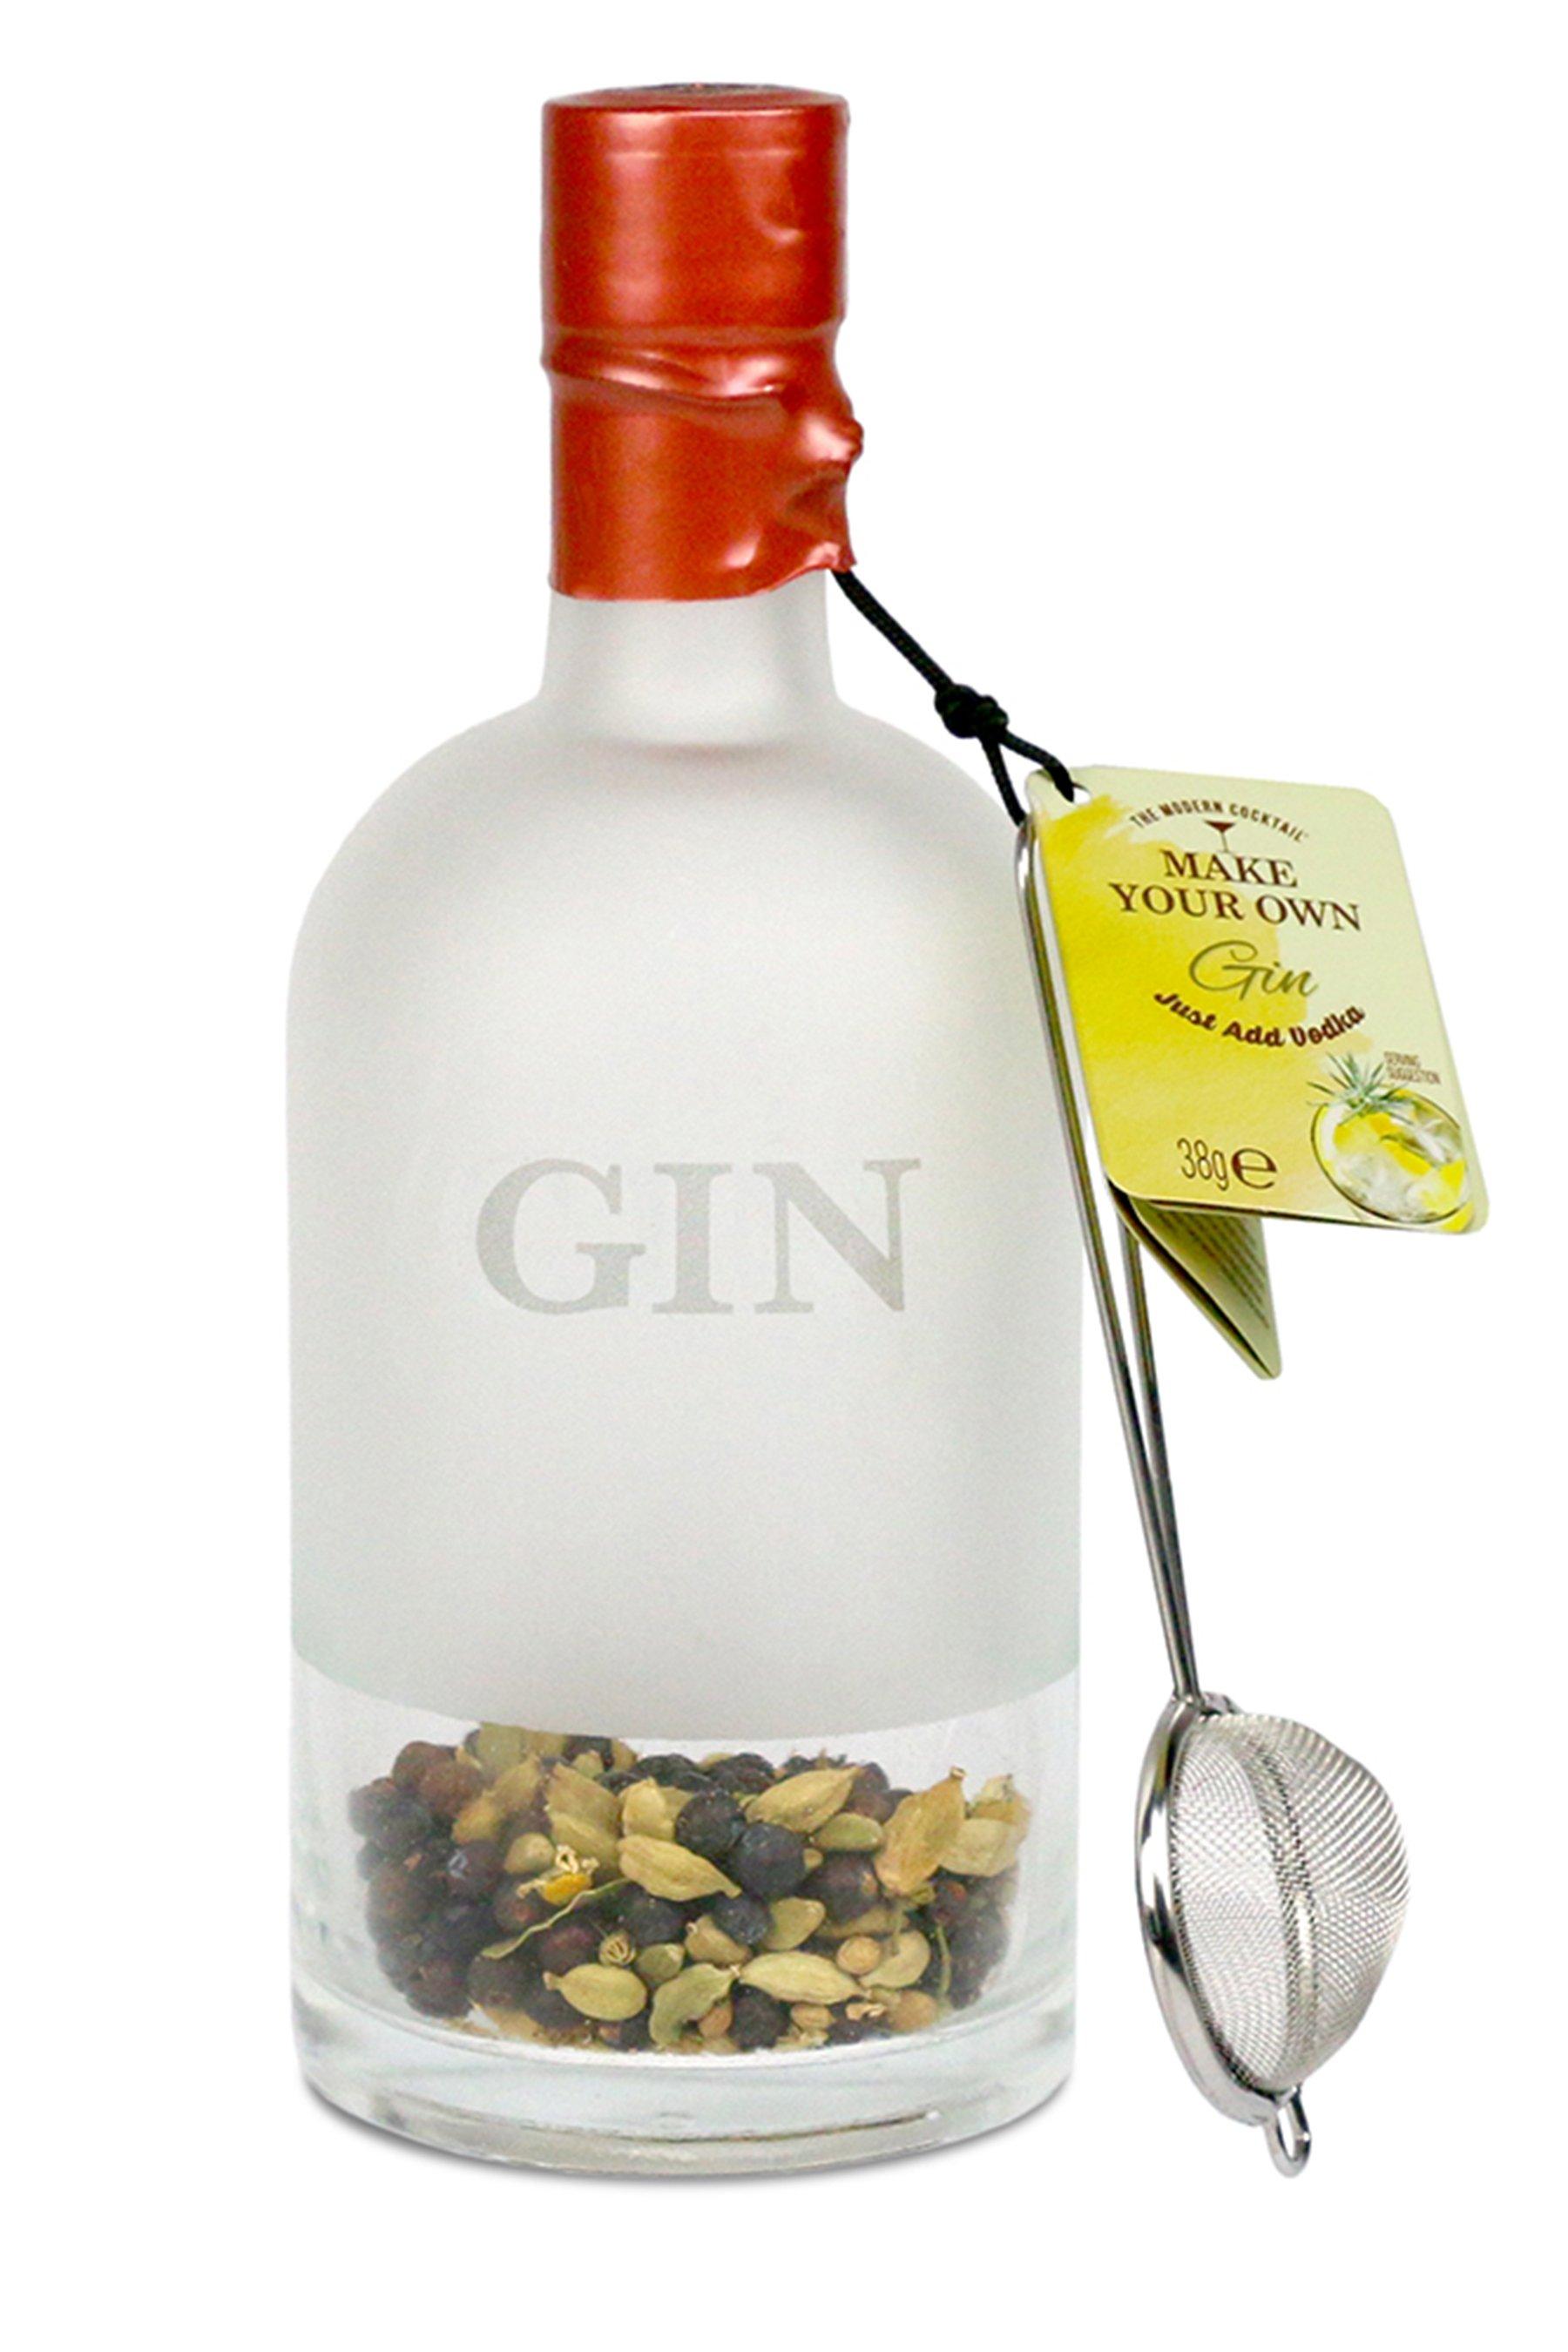 Make your own gin! 